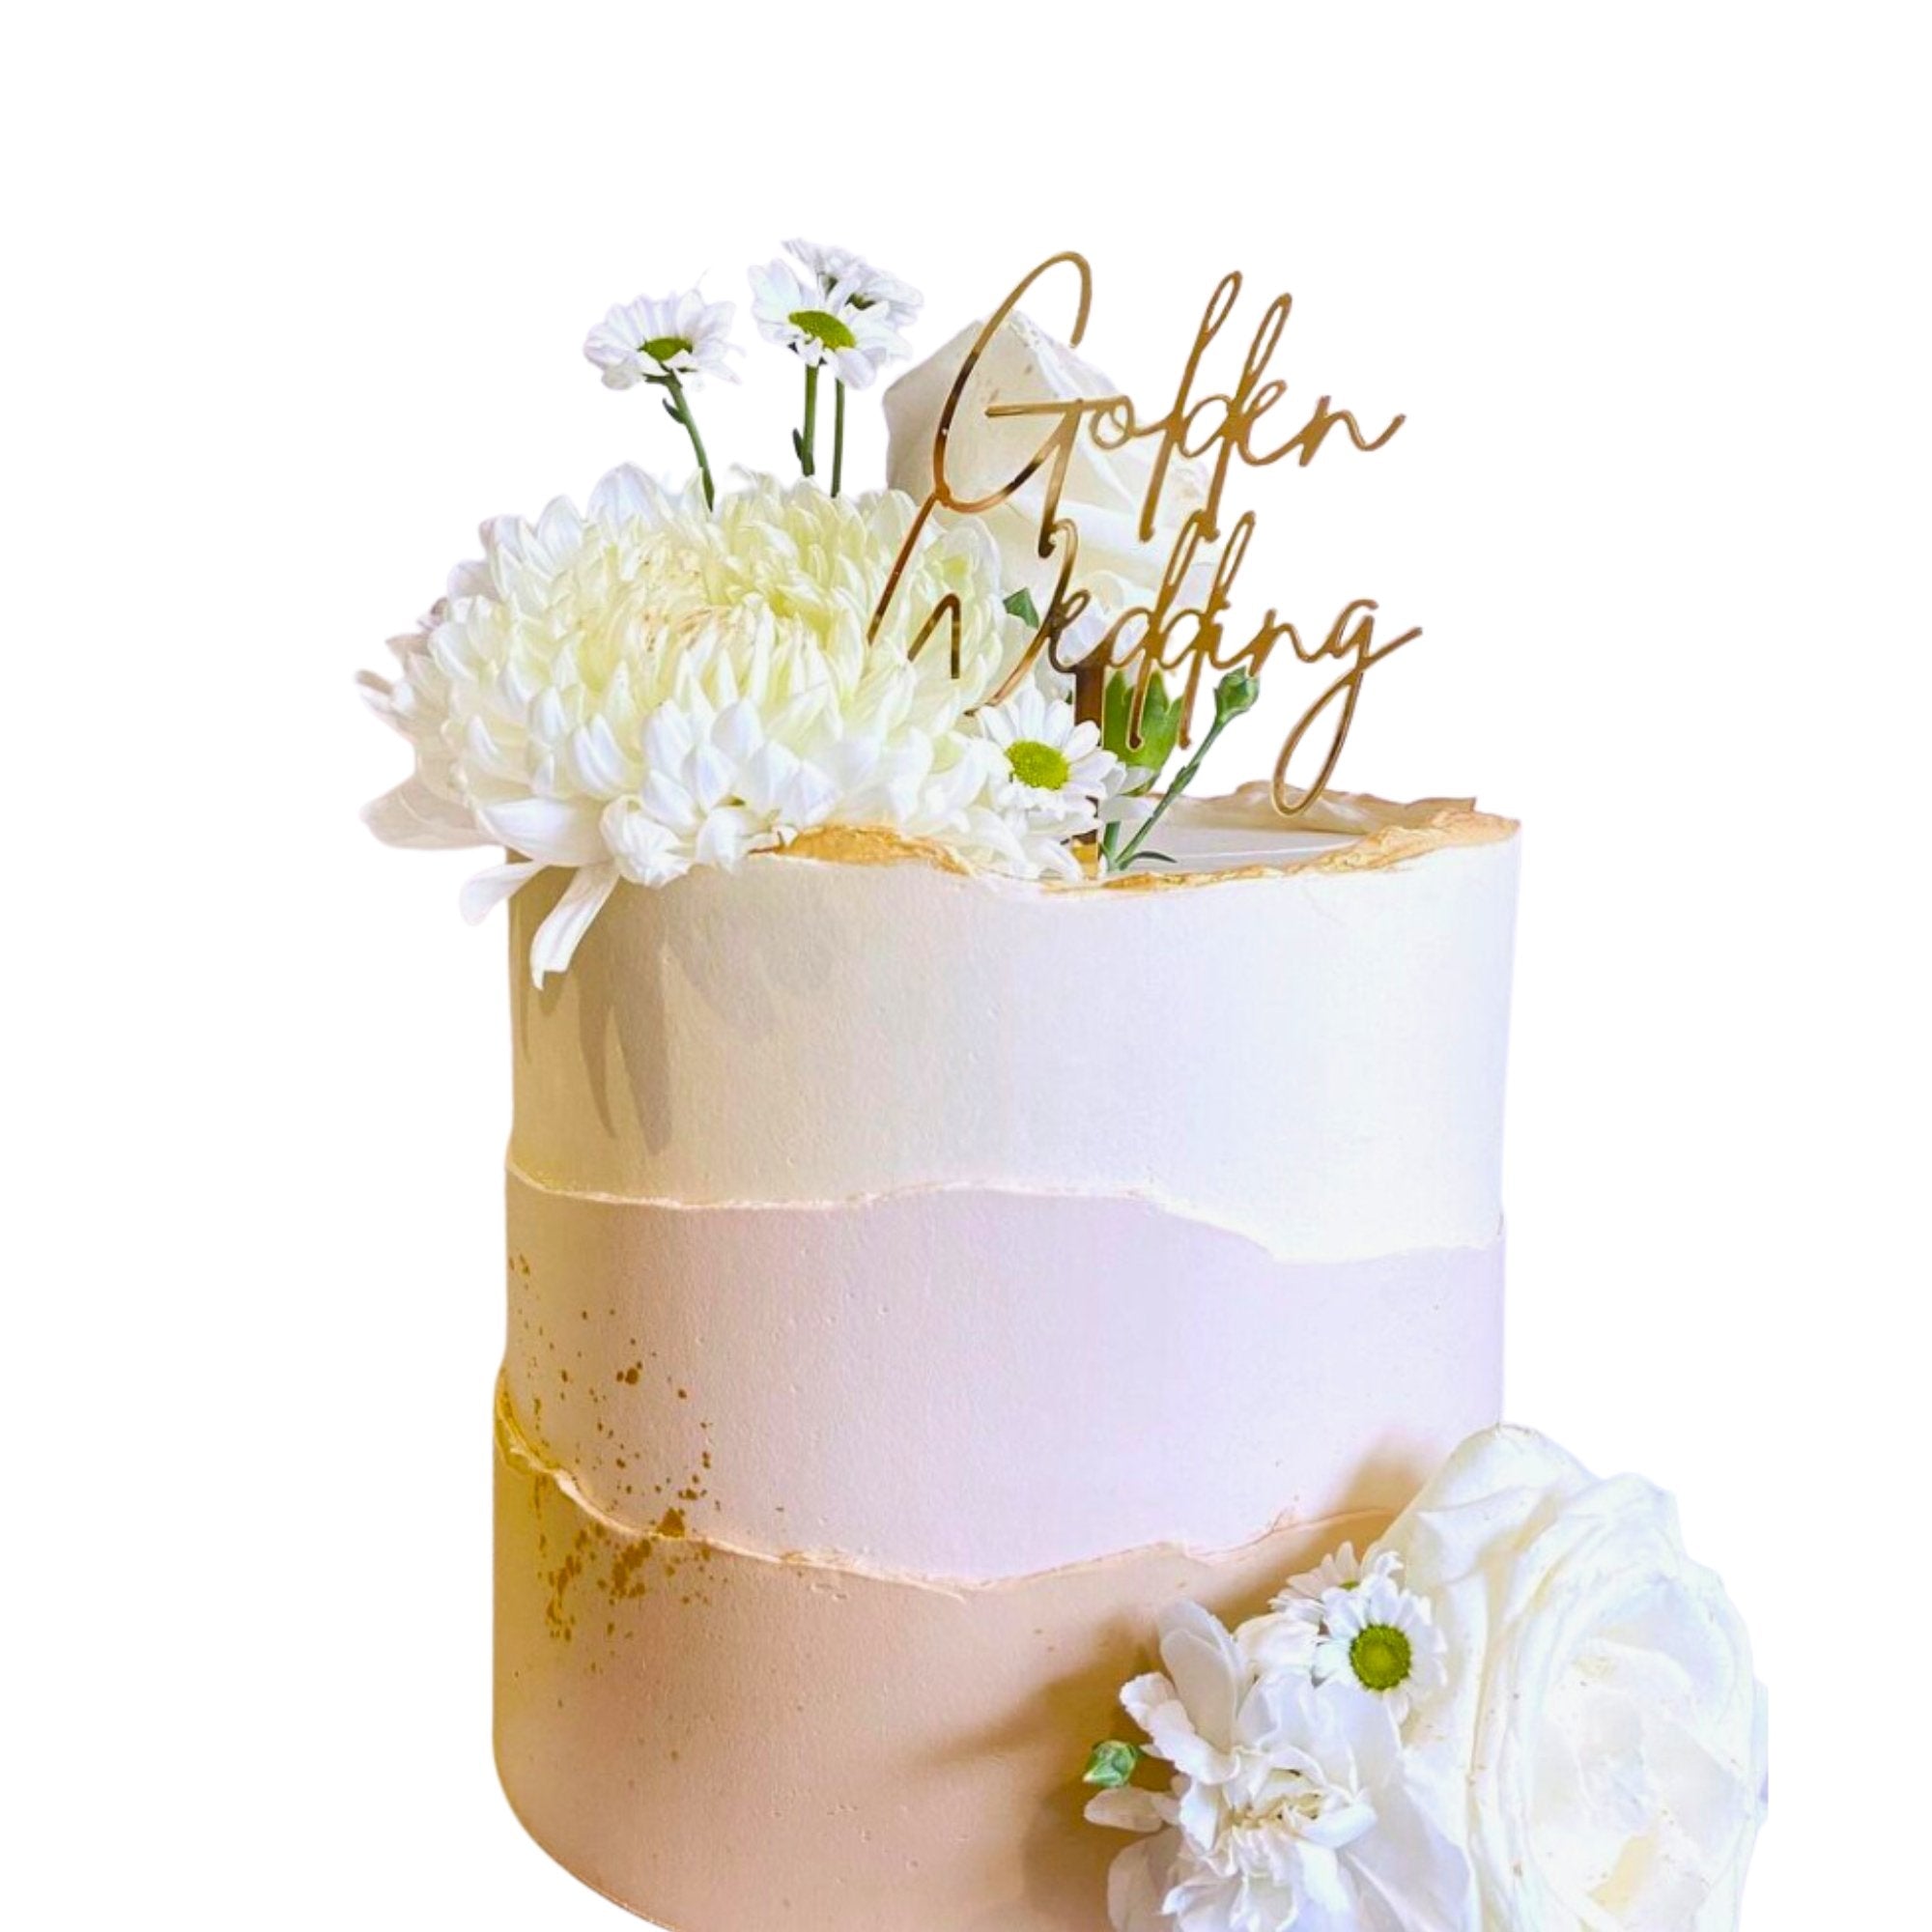 Custom Made Cake Toppers Australia - Chain Valley Gifts